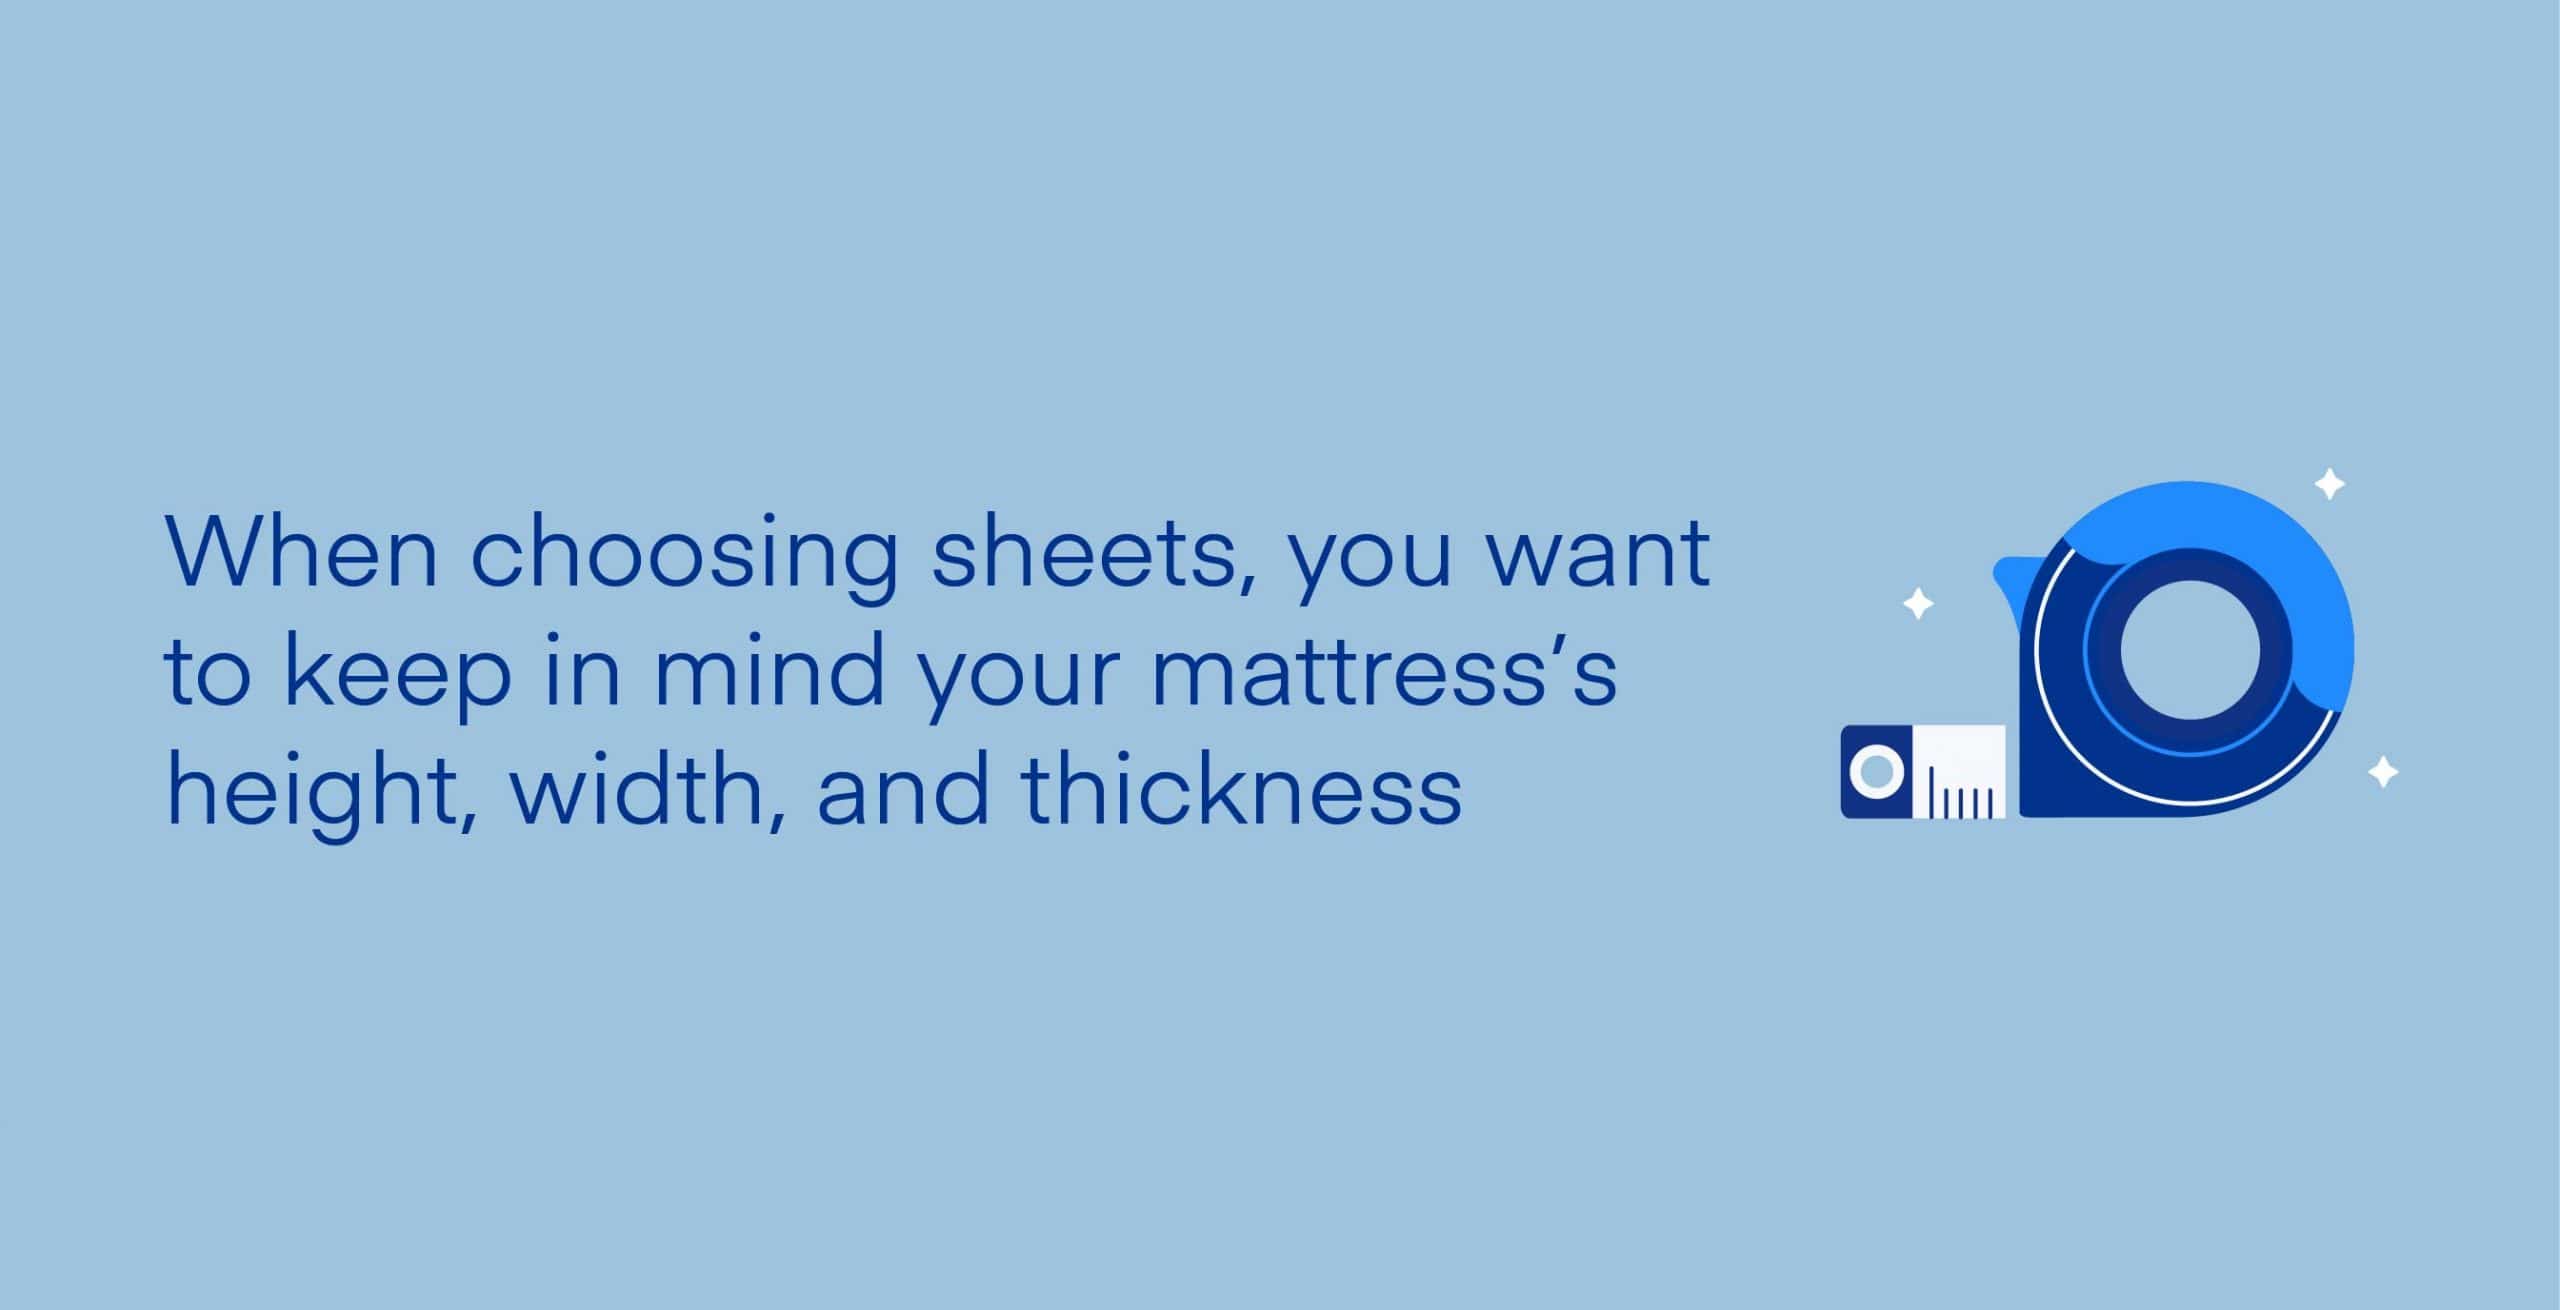 Bed Sheet Sizes And Dimensions Guide, Dimensions Of Xl Twin Bed Sheets